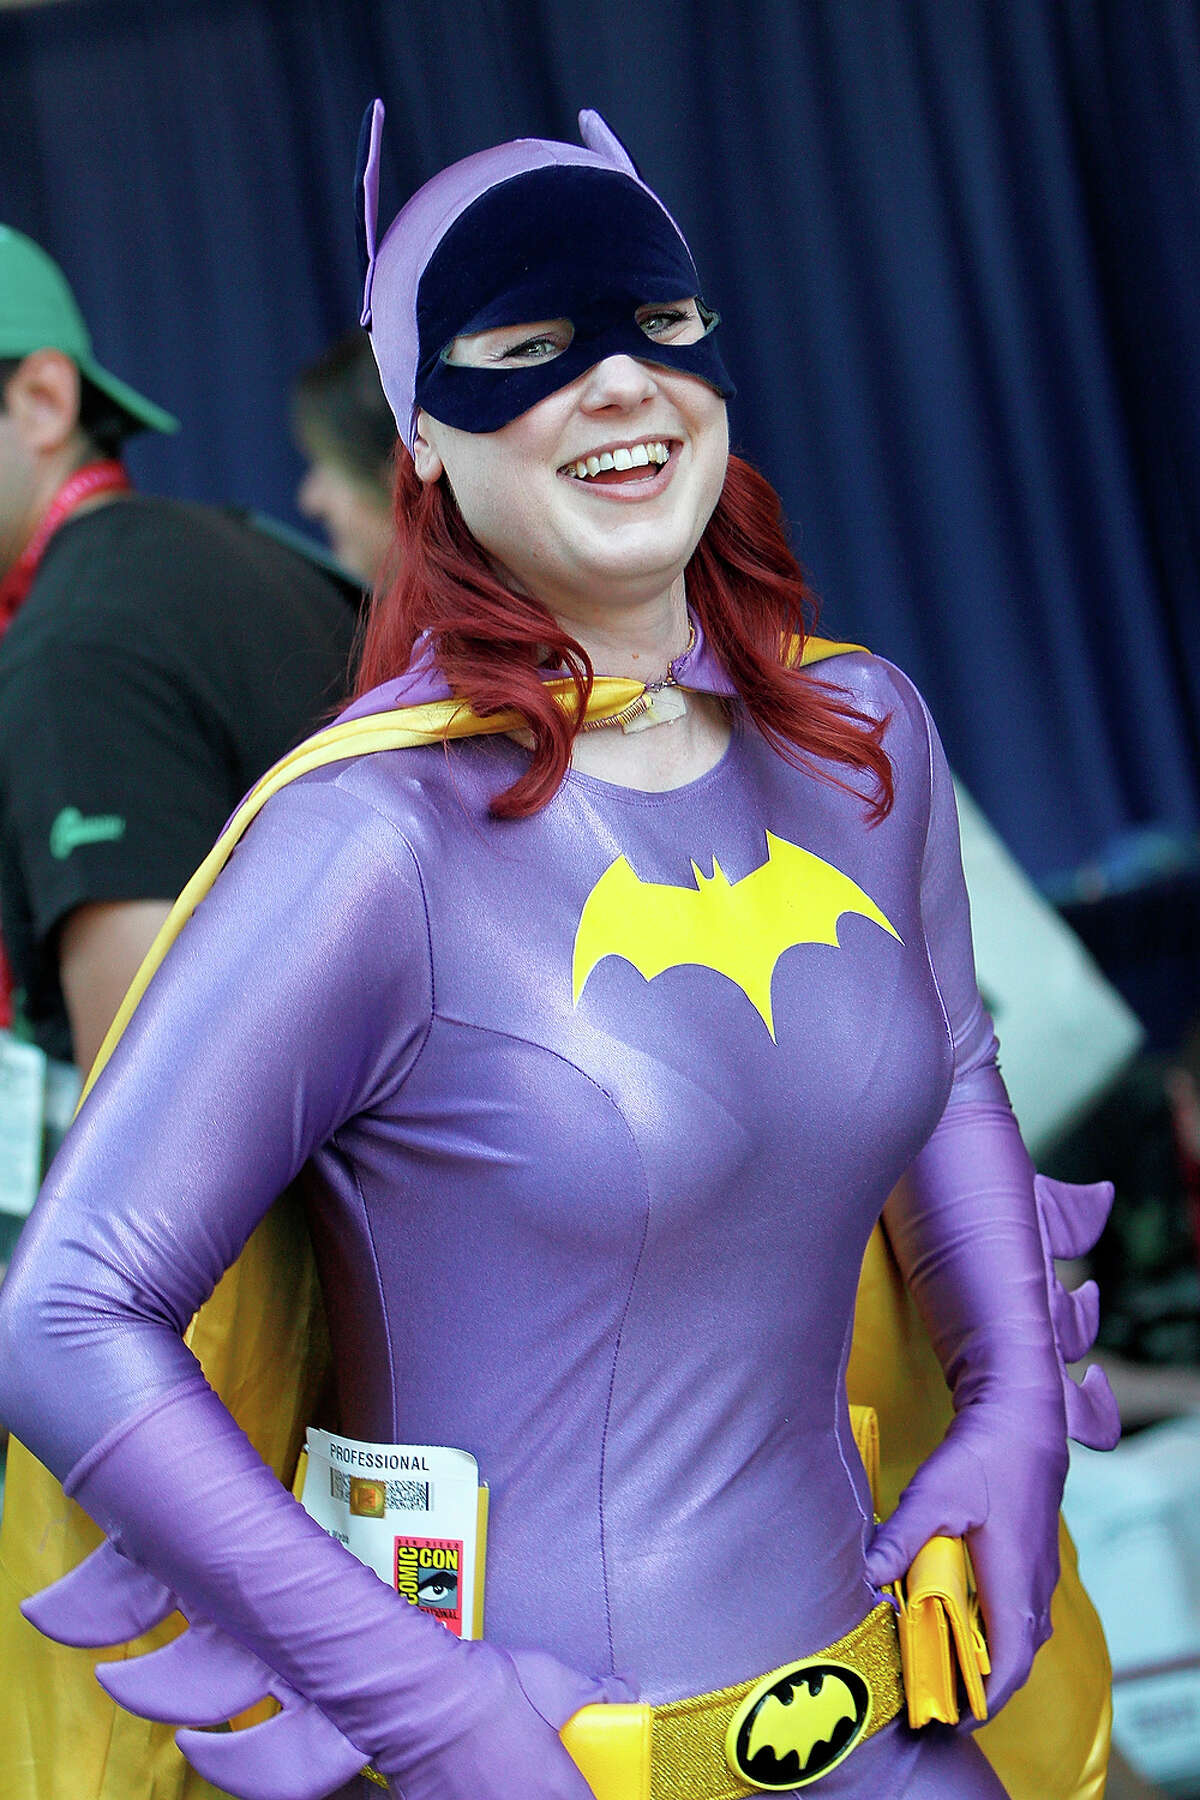 Batgirl 1 This is pretty accurate down to the hair color. We would be happy too if we could look like that in spandex. 